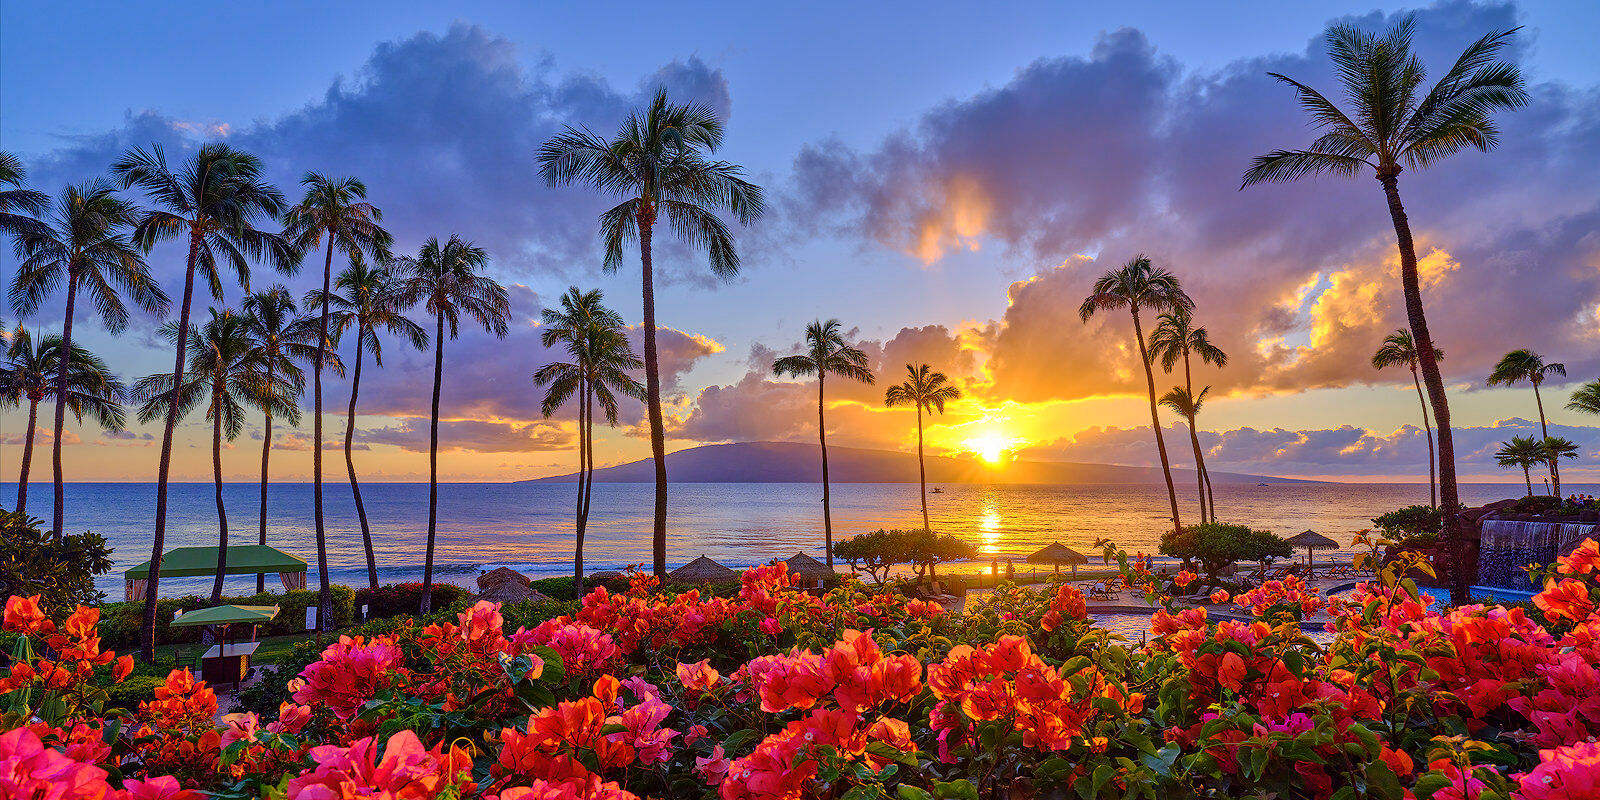 A very beautiful sunset at ka'anapali beach with coconut palms and bright red flowers in the flowers in the foregound with the island of Lanai in the background